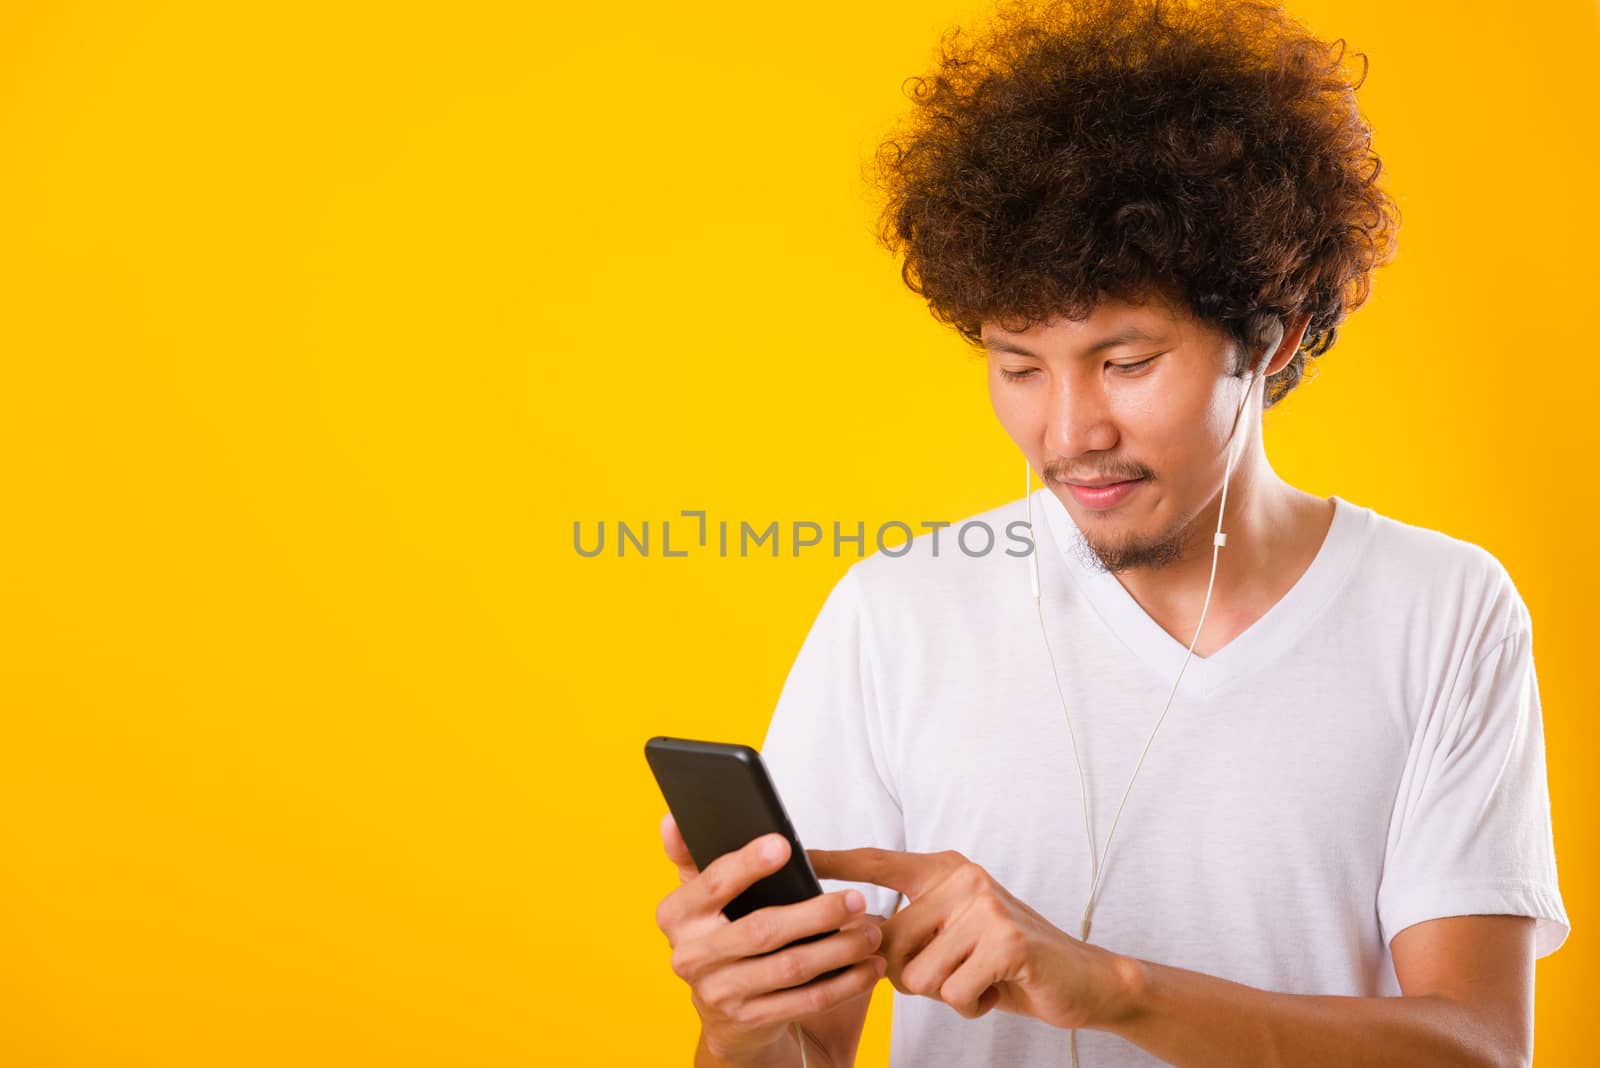 Happy asian handsome man with curly hair he smiling enjoying listening to music on earphones using a mobile smartphone isolate on yellow background